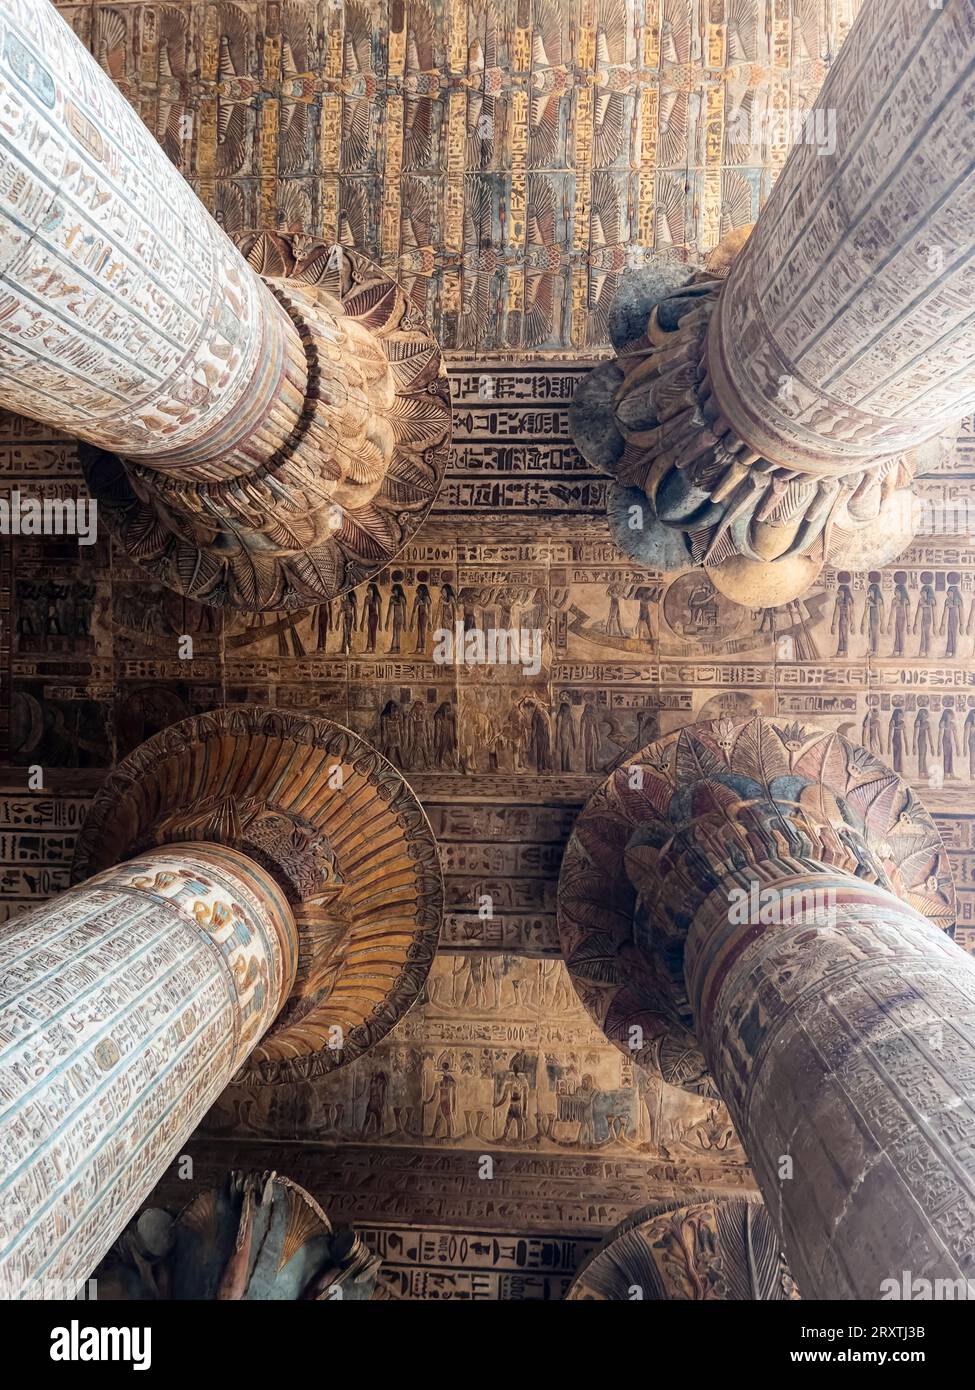 Columns in the Temple of Hathor, which began construction in 54 B.C.E, part of the Dendera Temple complex, Dendera, Egypt, North Africa, Africa Stock Photo